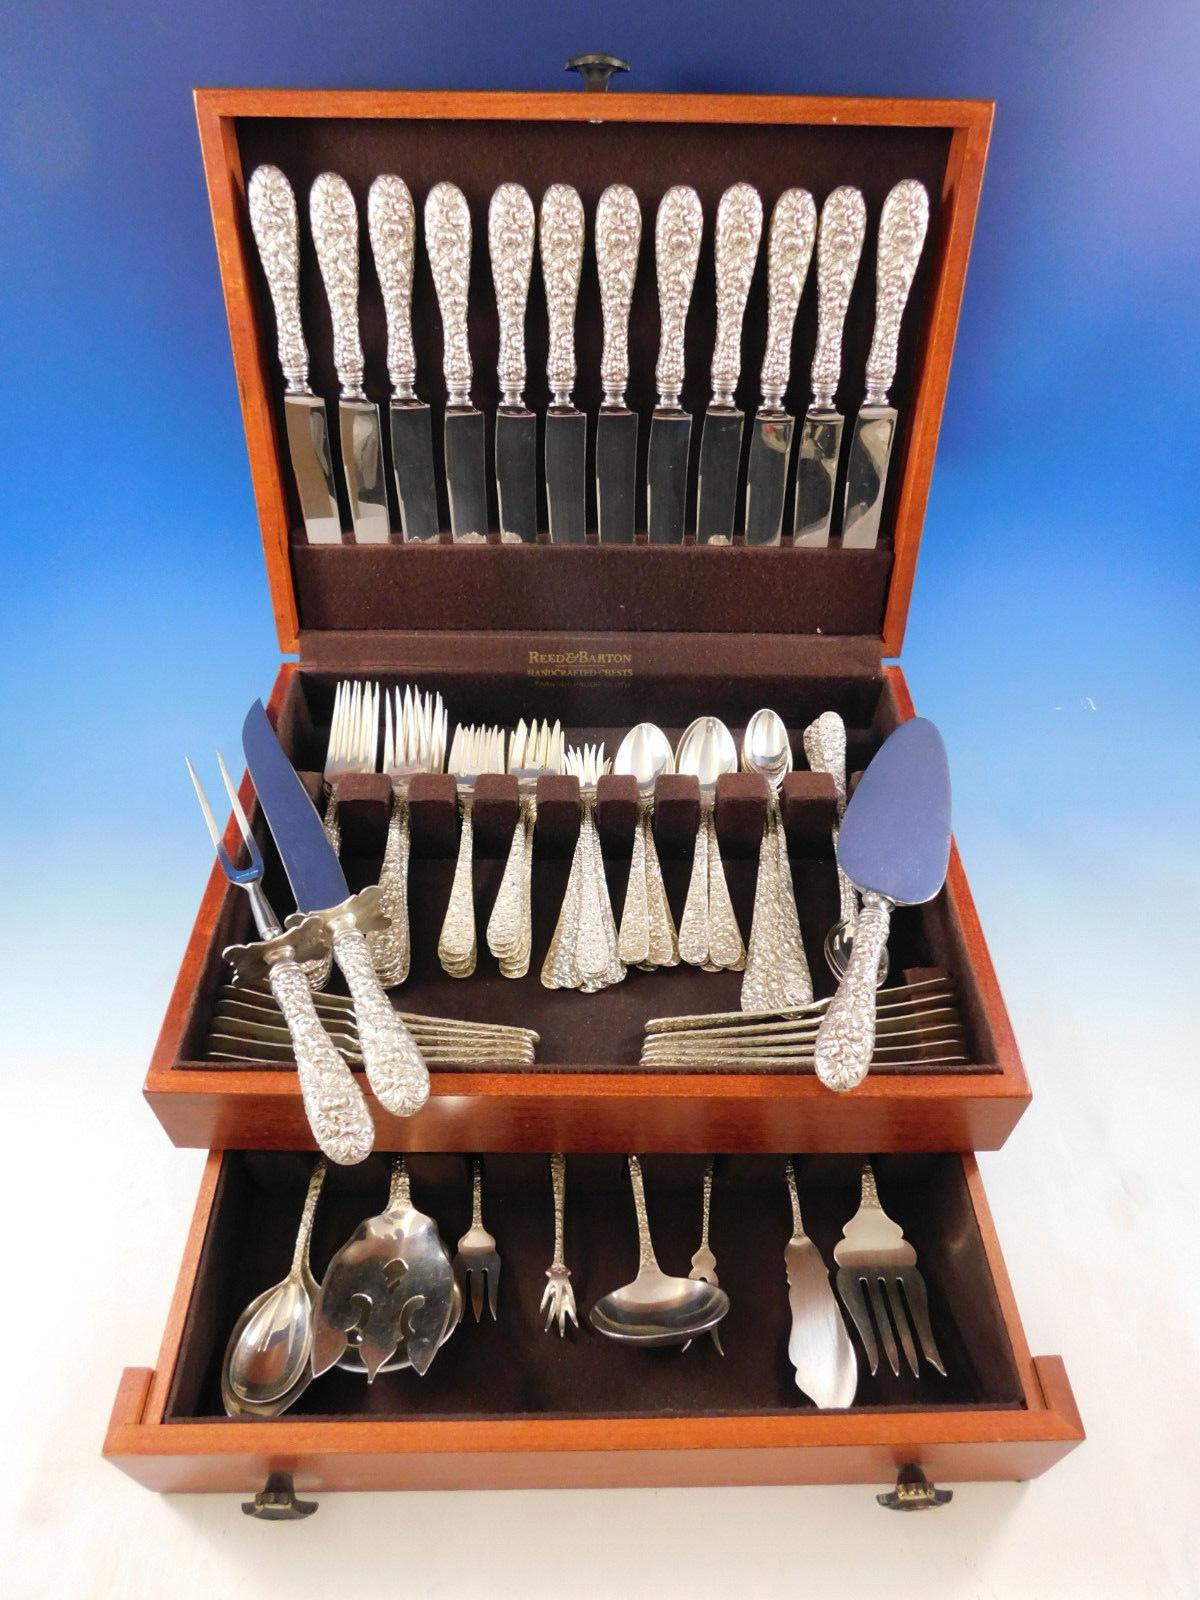 Large dinner size rose by Stieff repousséd sterling silver Flatware set, 97 pieces. This set includes:

12 Dinner Size Knives, 9 1/2